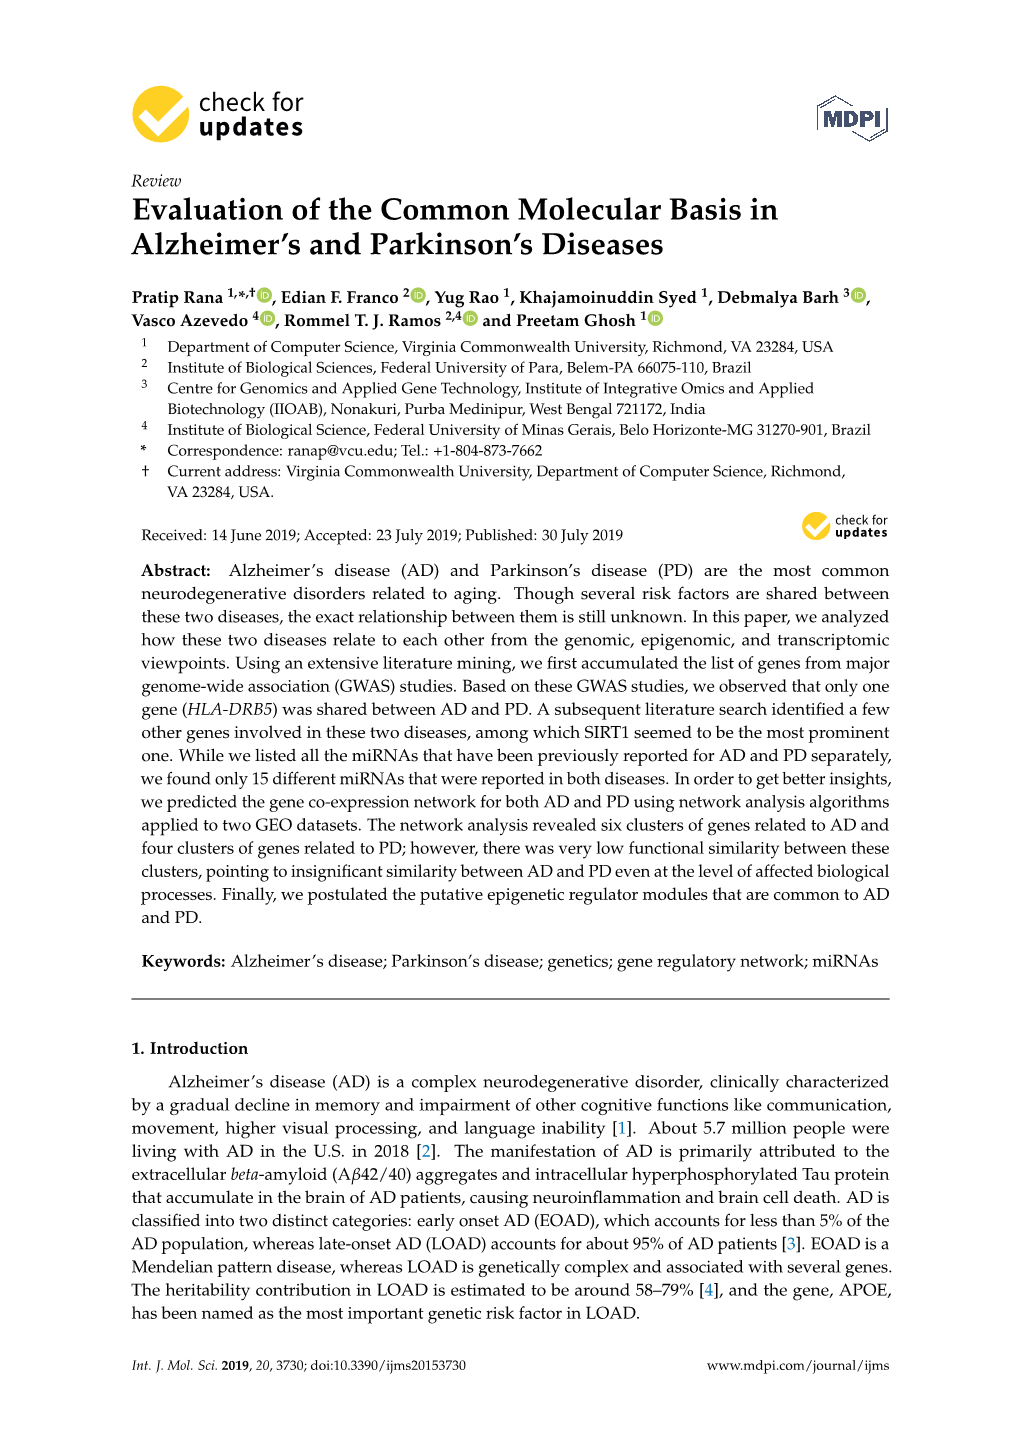 Evaluation of the Common Molecular Basis in Alzheimer's